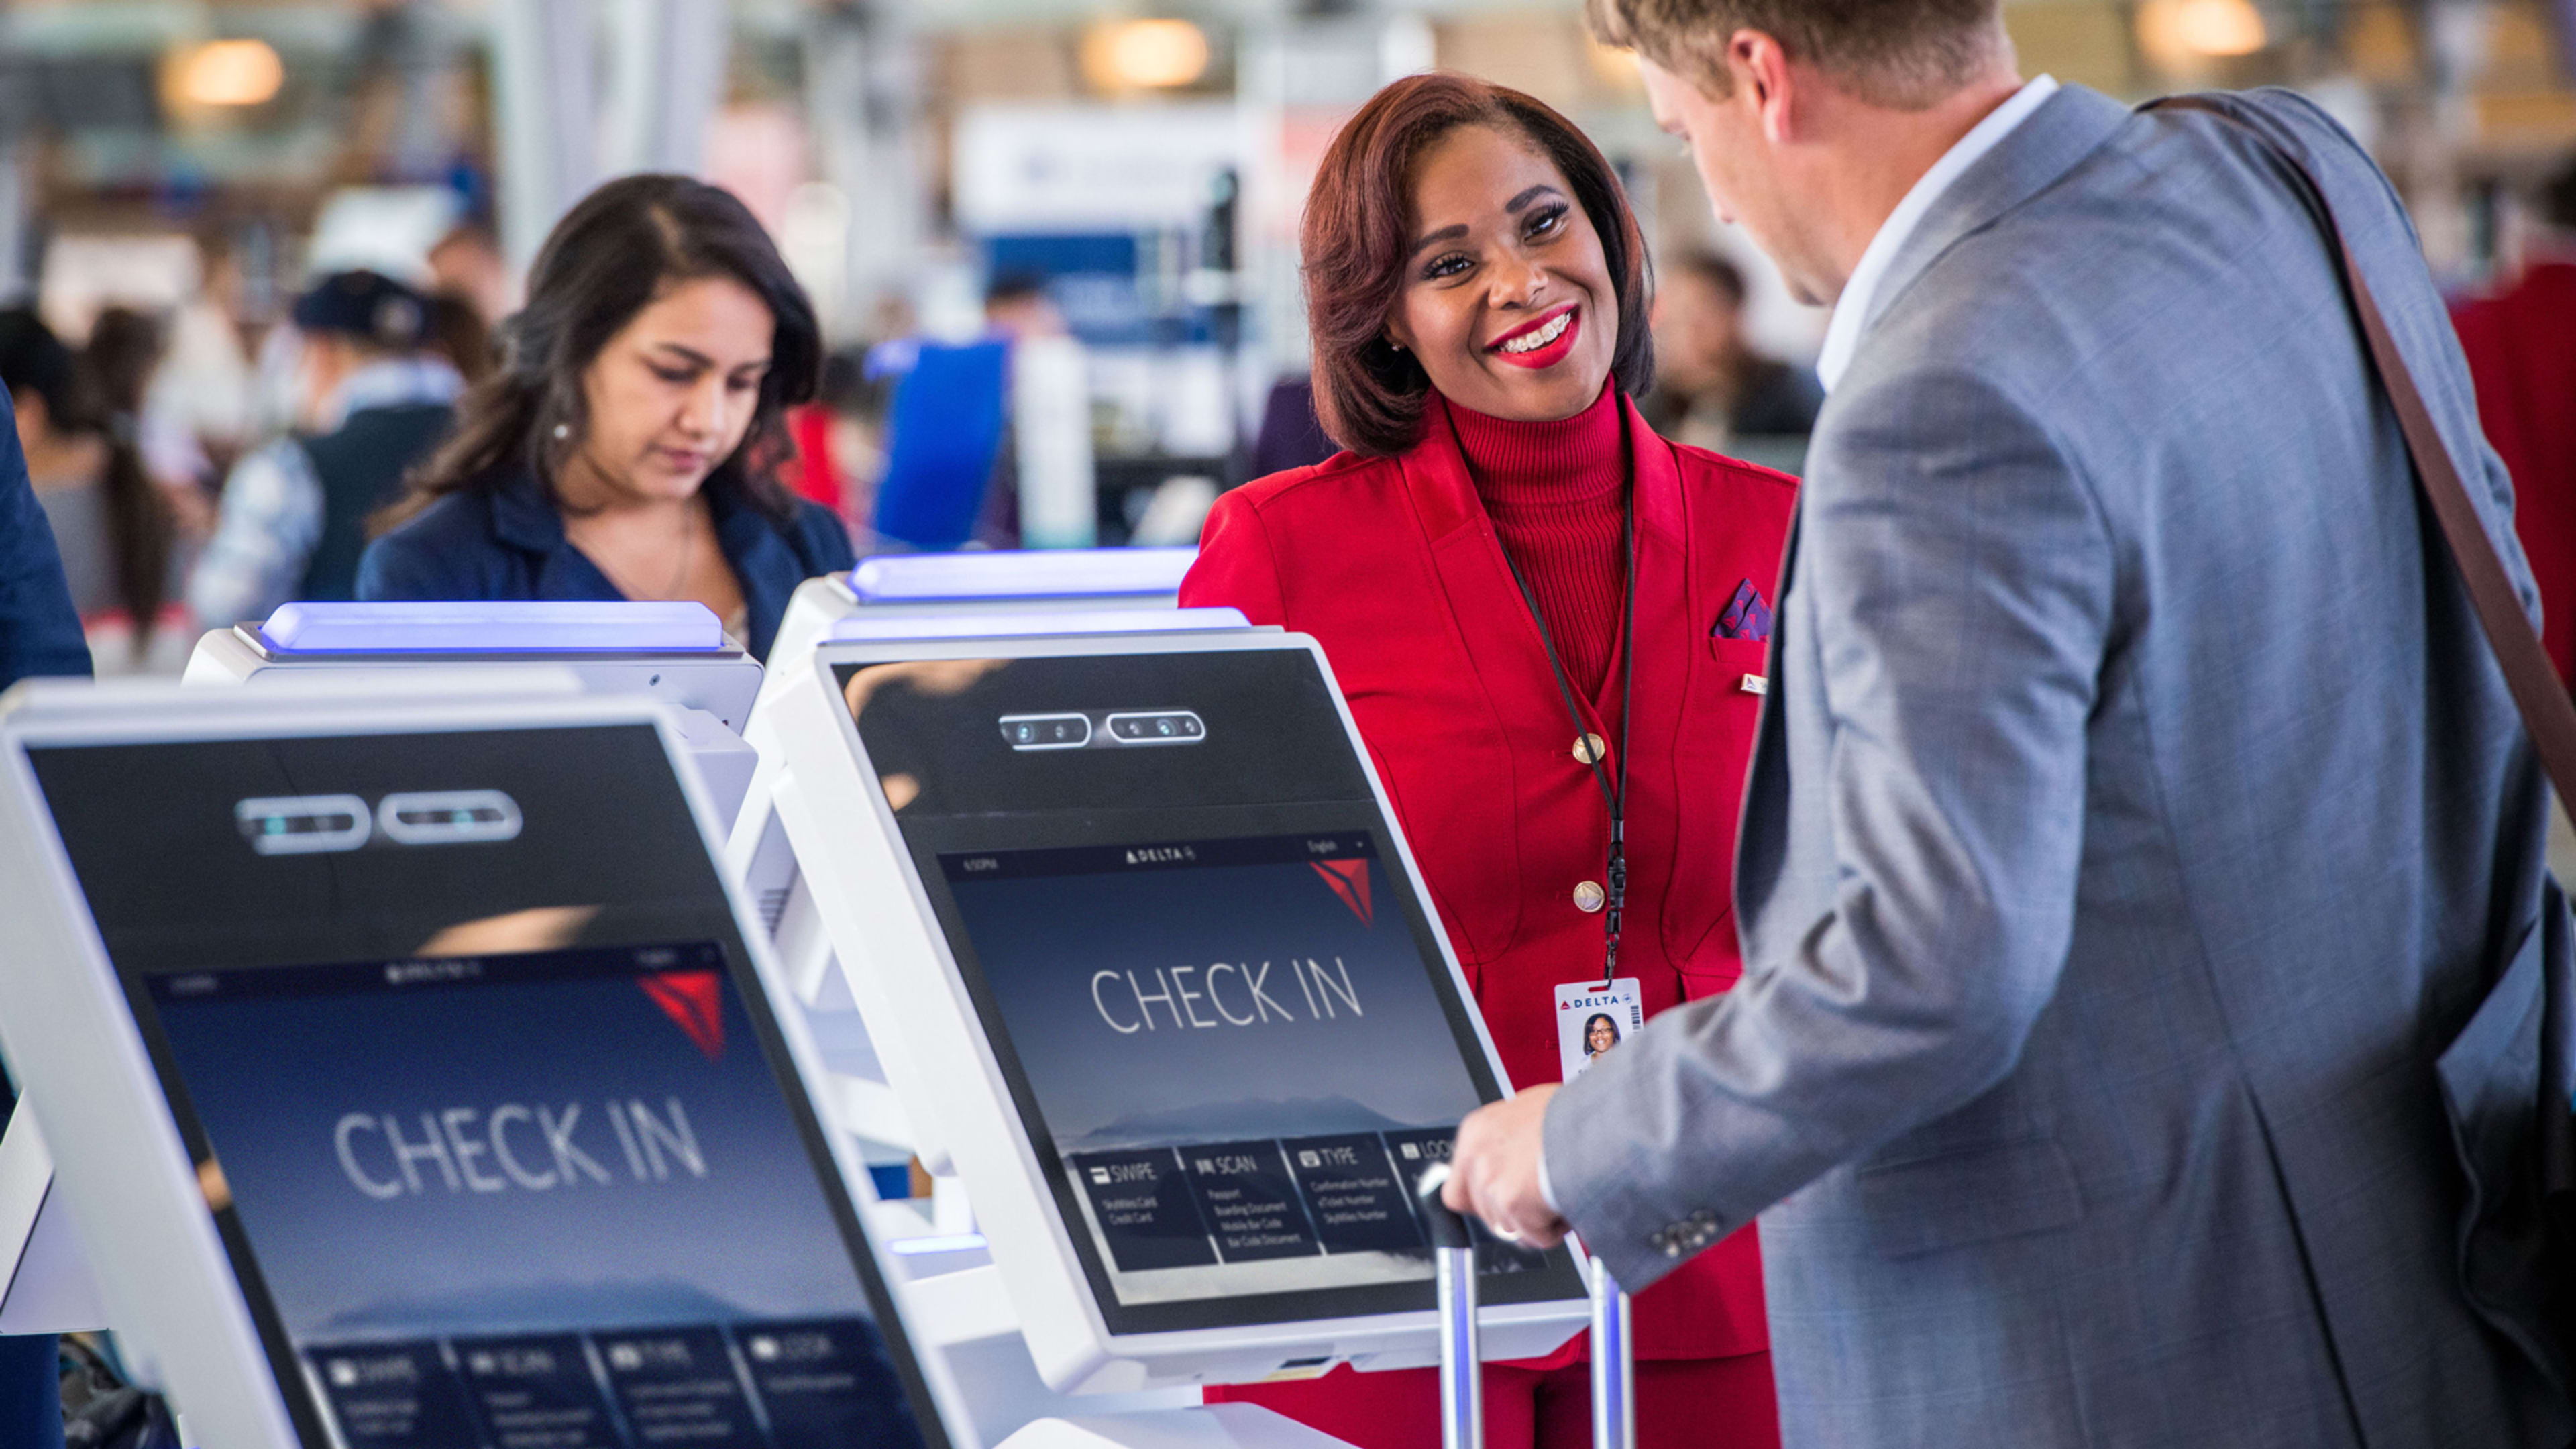 American Airlines is offering biometric boarding at LAX Terminal 4